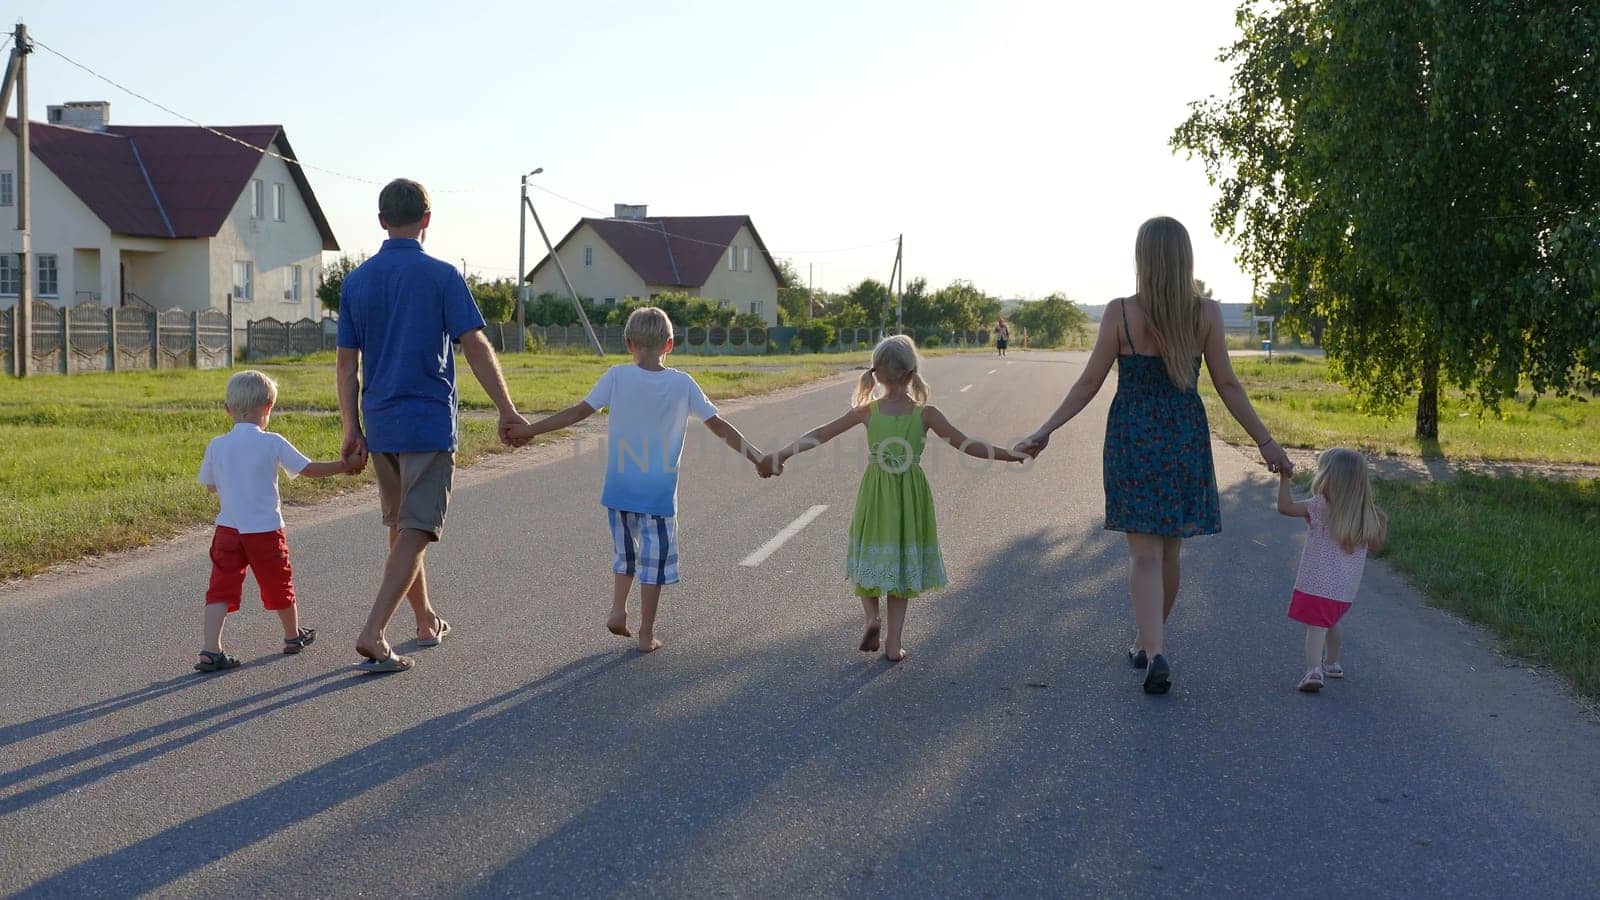 Strong friendly family holding hands goes along the road